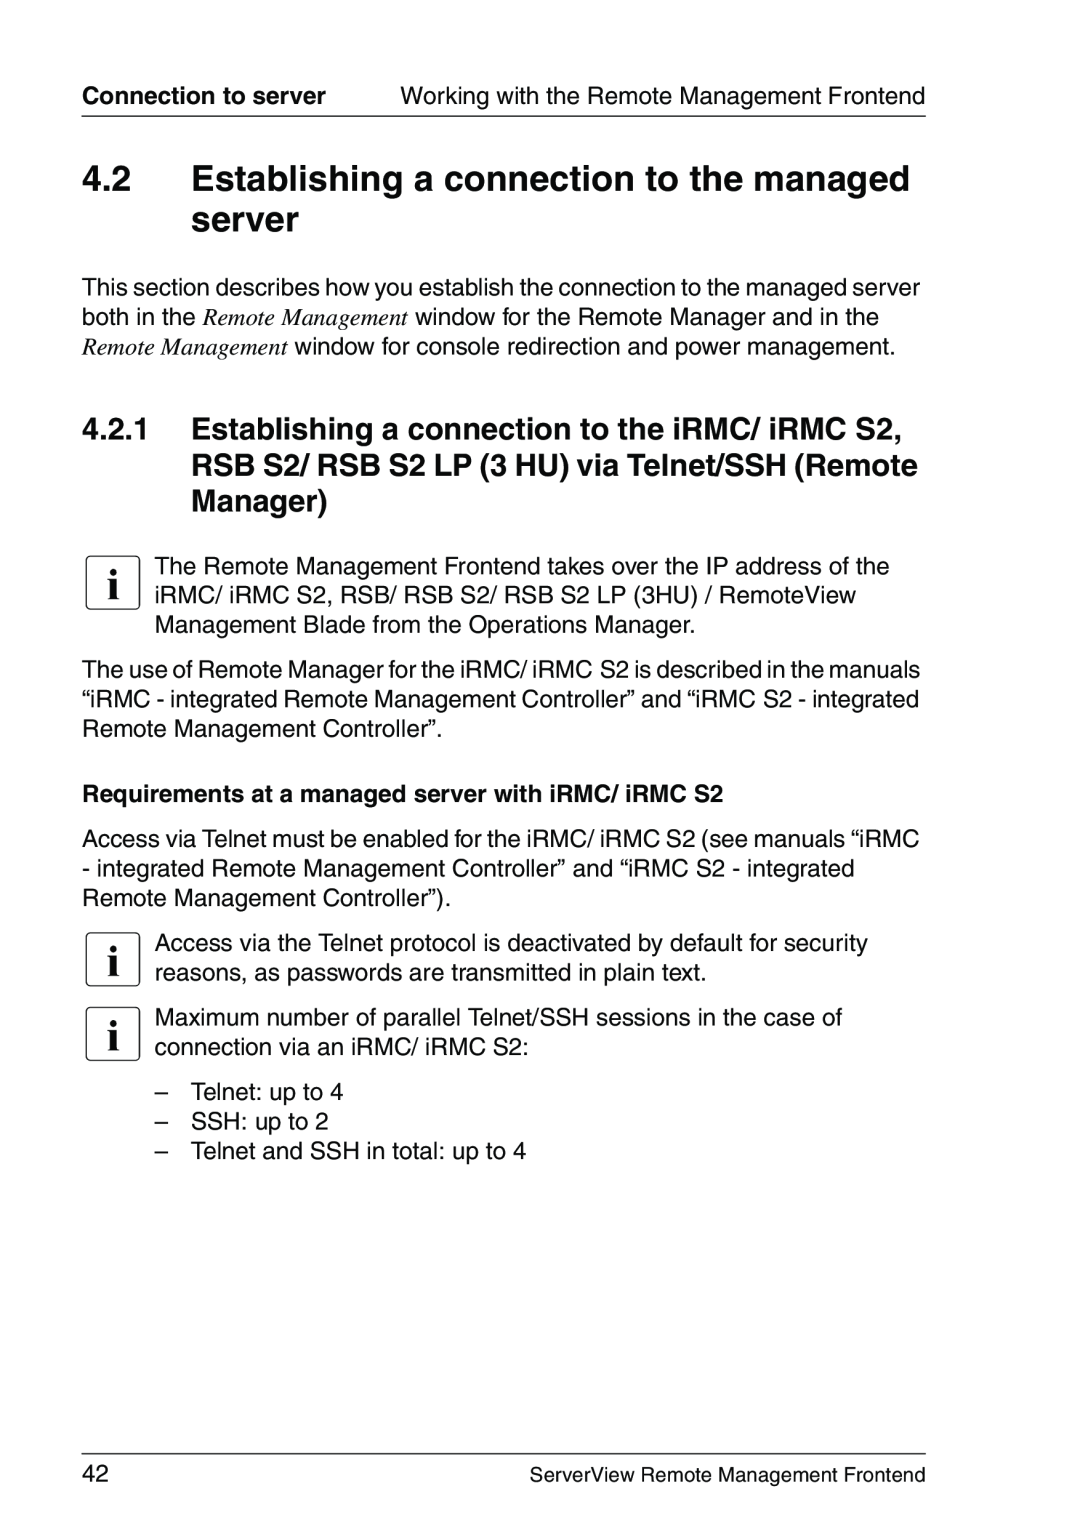 Fujitsu V4.90 manual Establishing a connection to the managed server, Requirements at a managed server with iRMC/ iRMC S2 